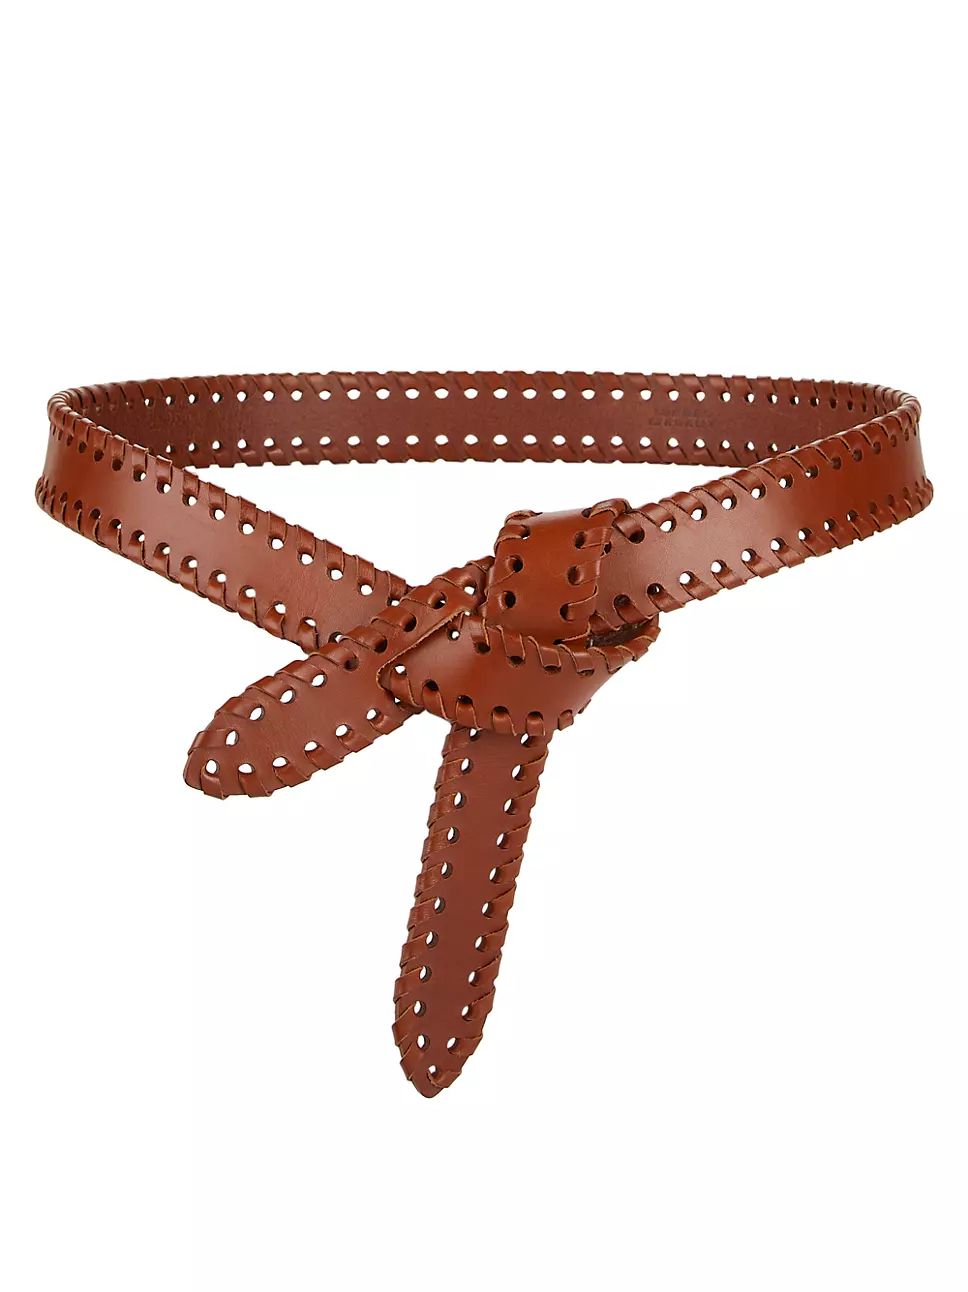 Lecce Braided Leather Belt | Saks Fifth Avenue